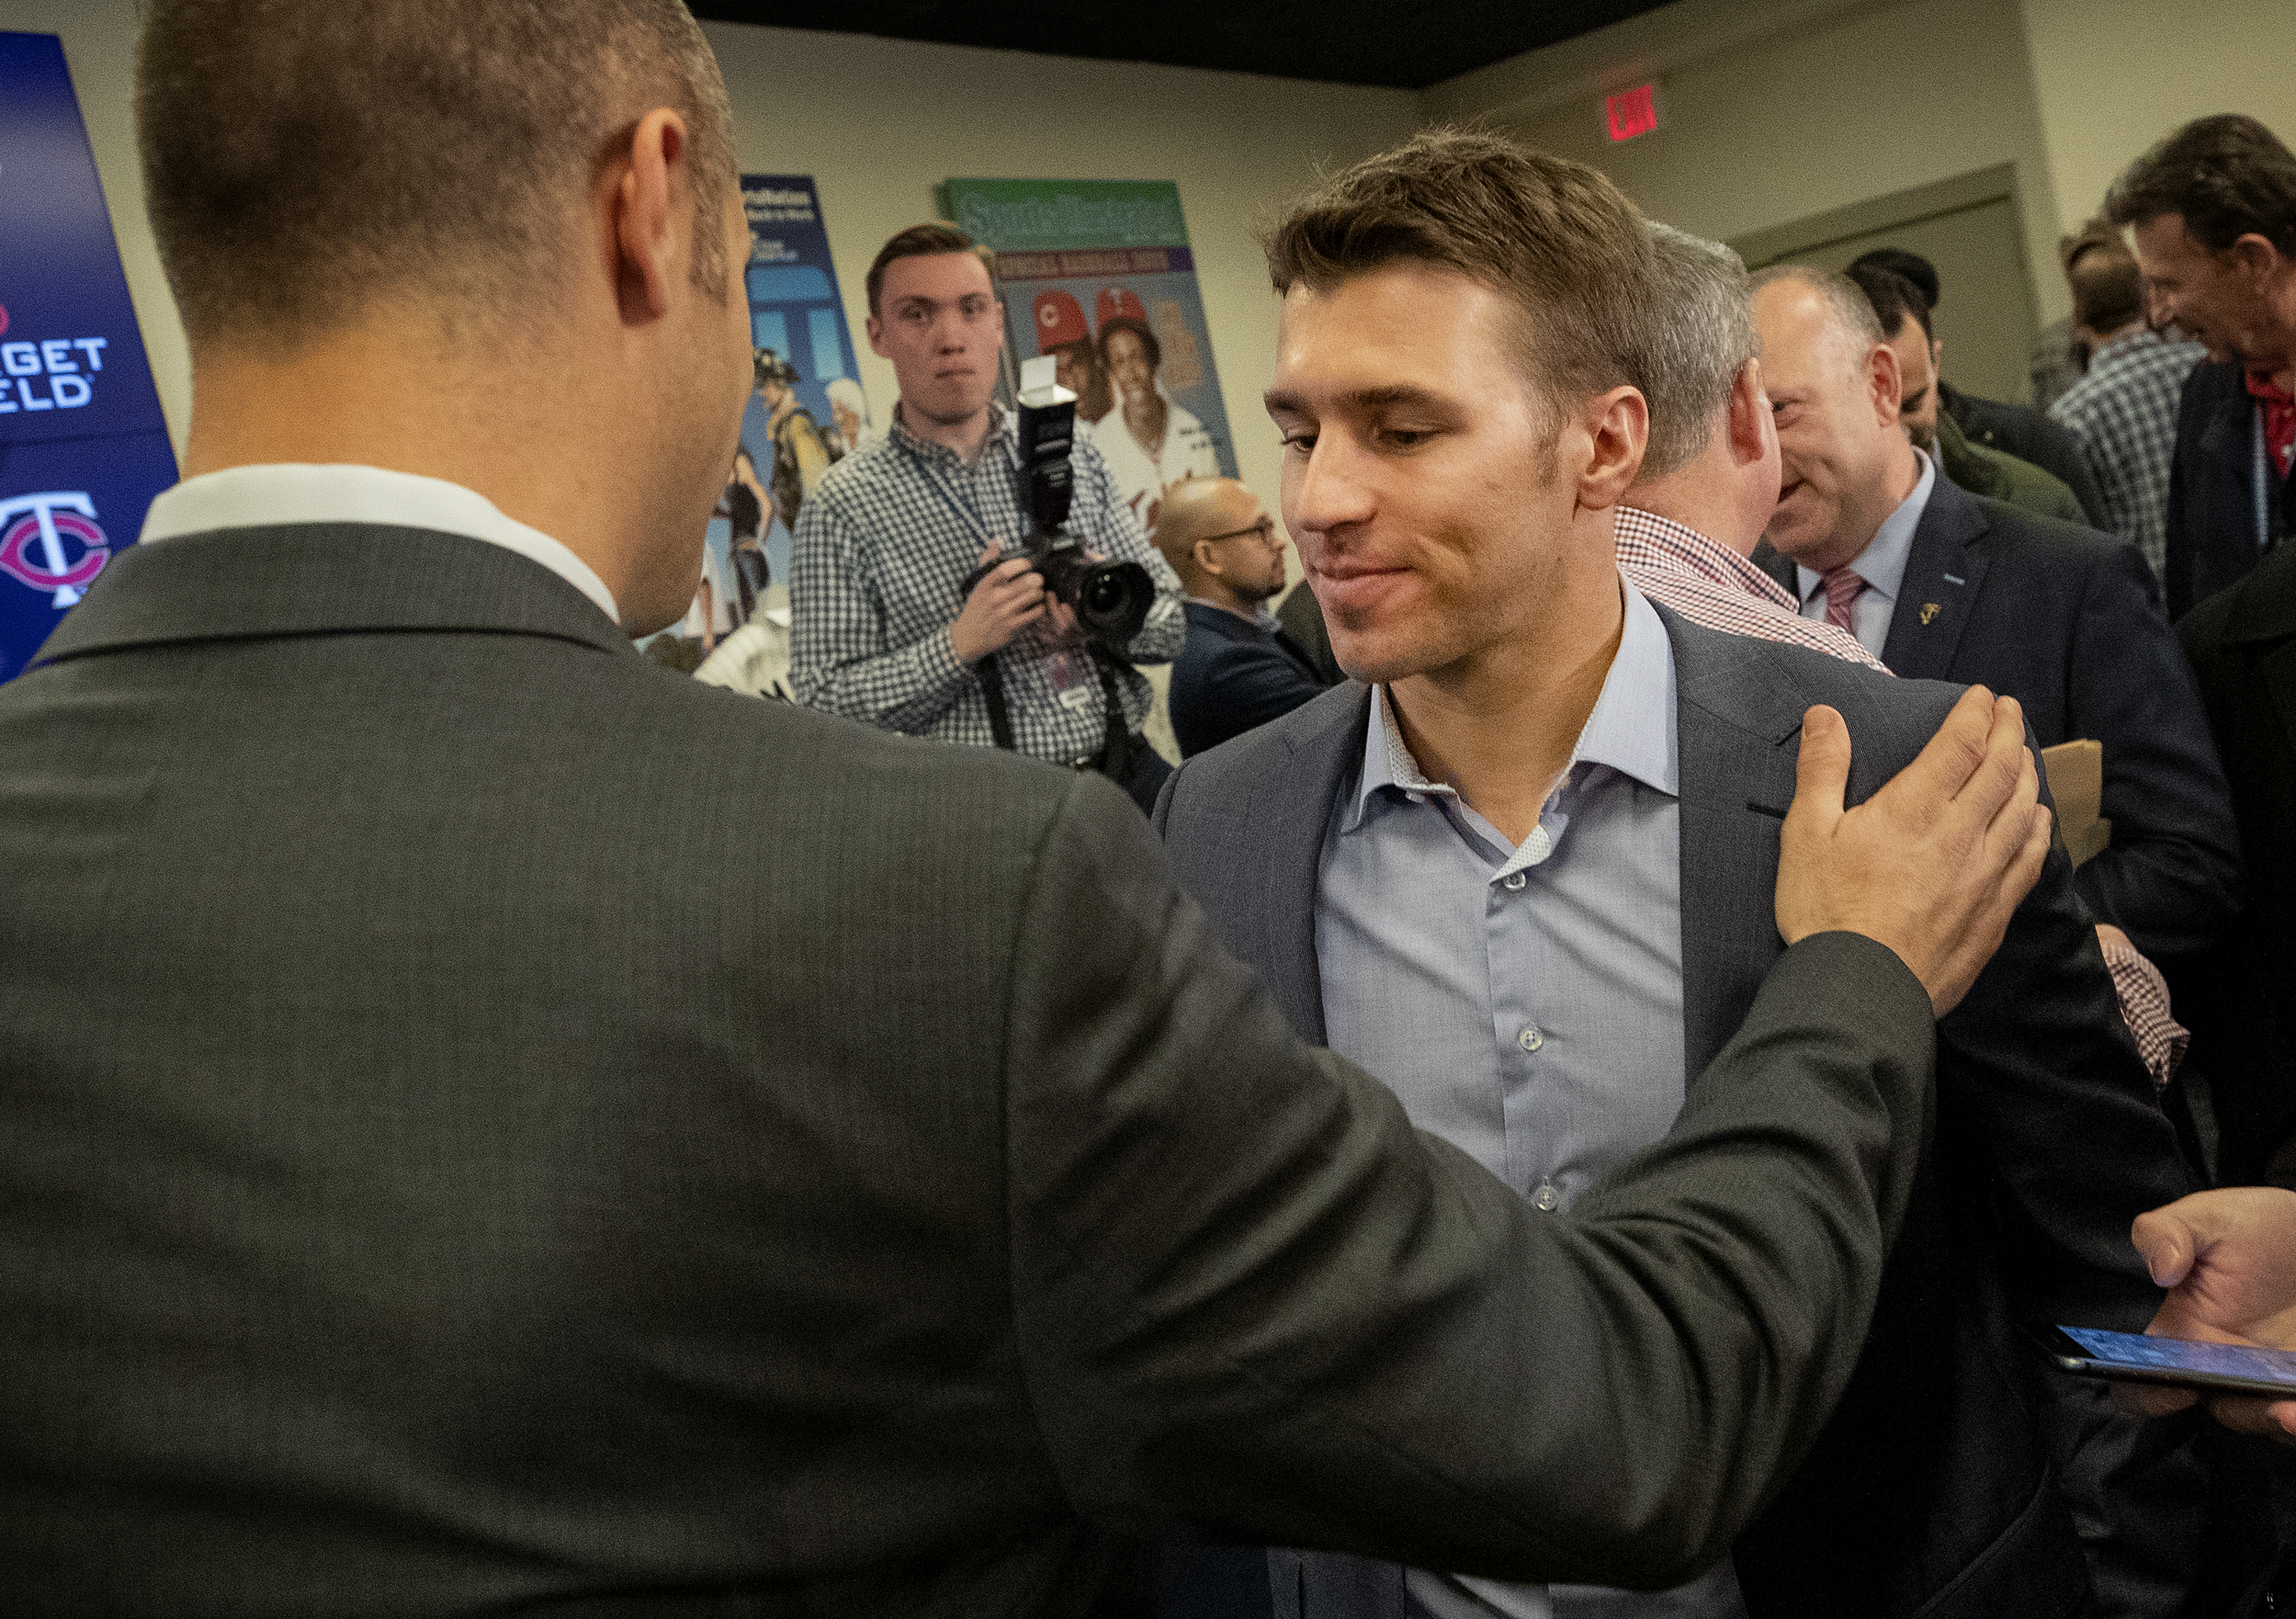 Joe Mauer was greeted by the Wild's Zach Parise after his retirement news conference at Target Field.